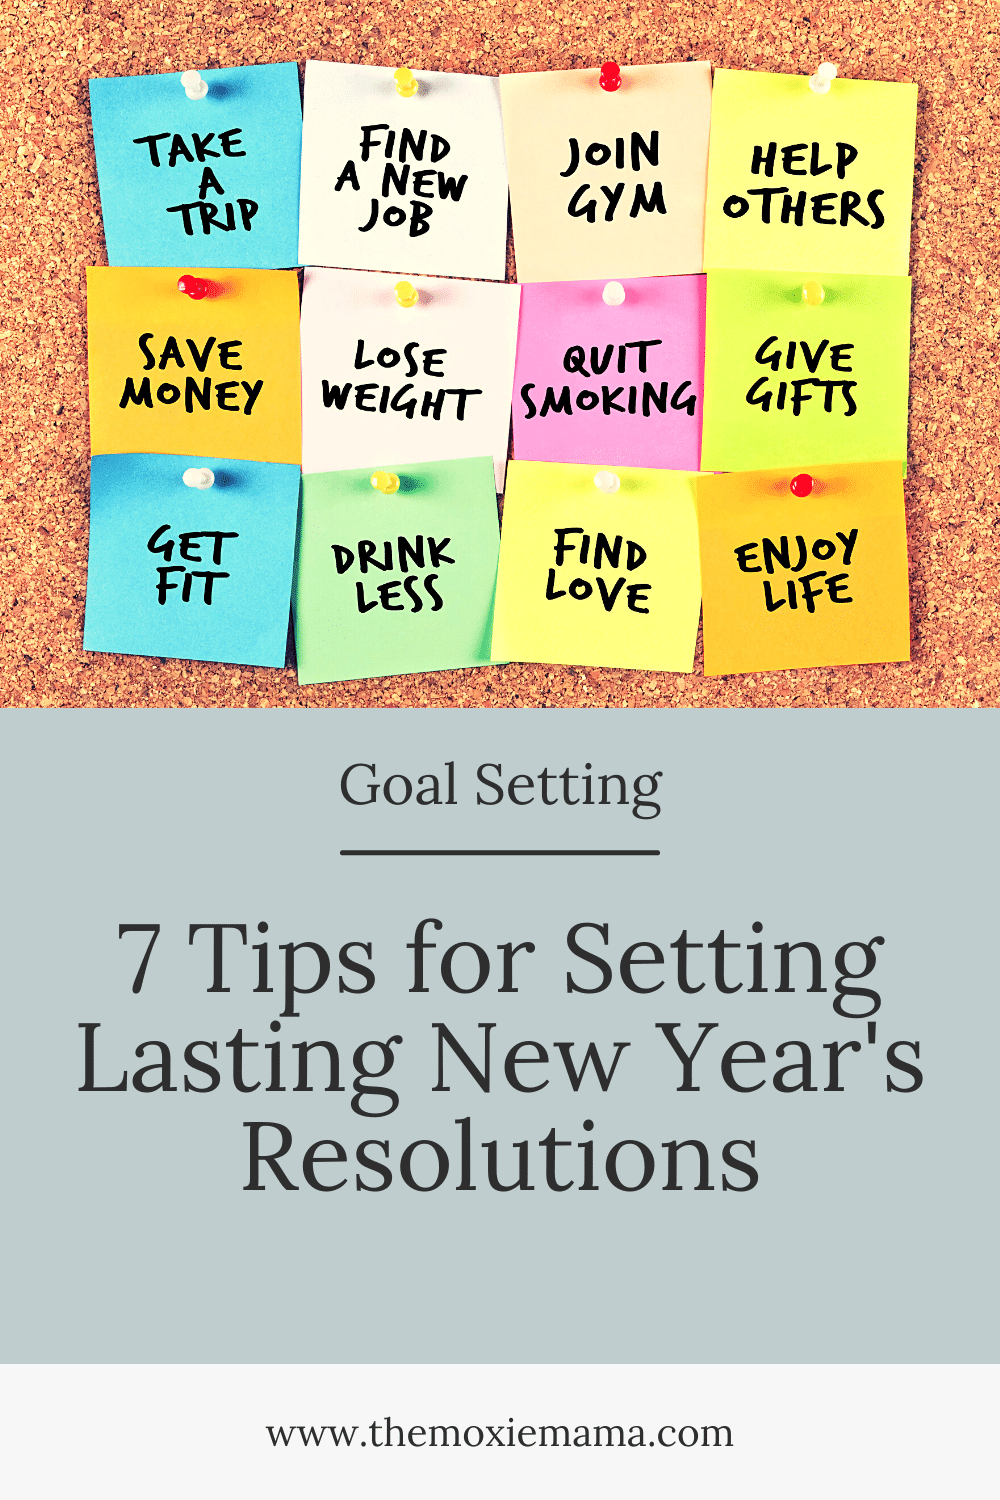 Is running your New Year's resolution? And after the first month you've got  used to your usual routine which is now boring? Next week try…